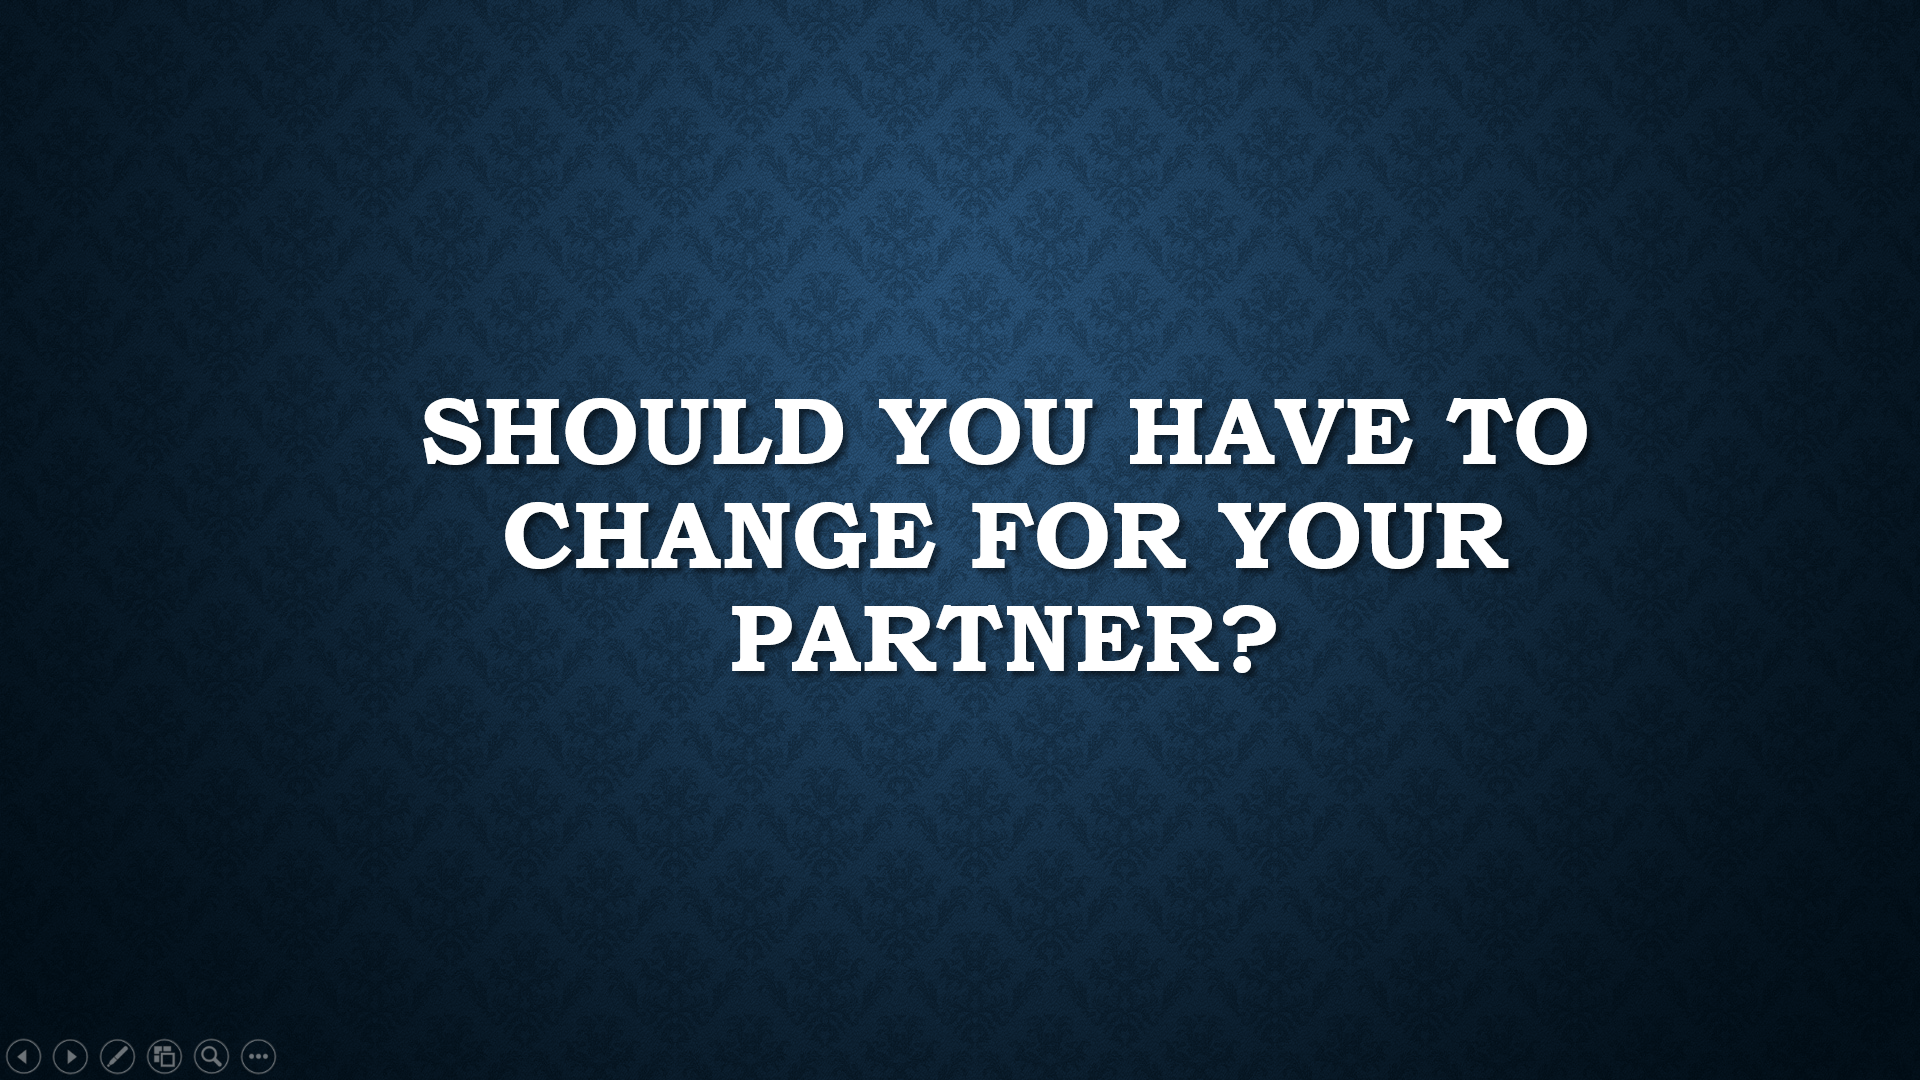 Should you have to change for your partner?